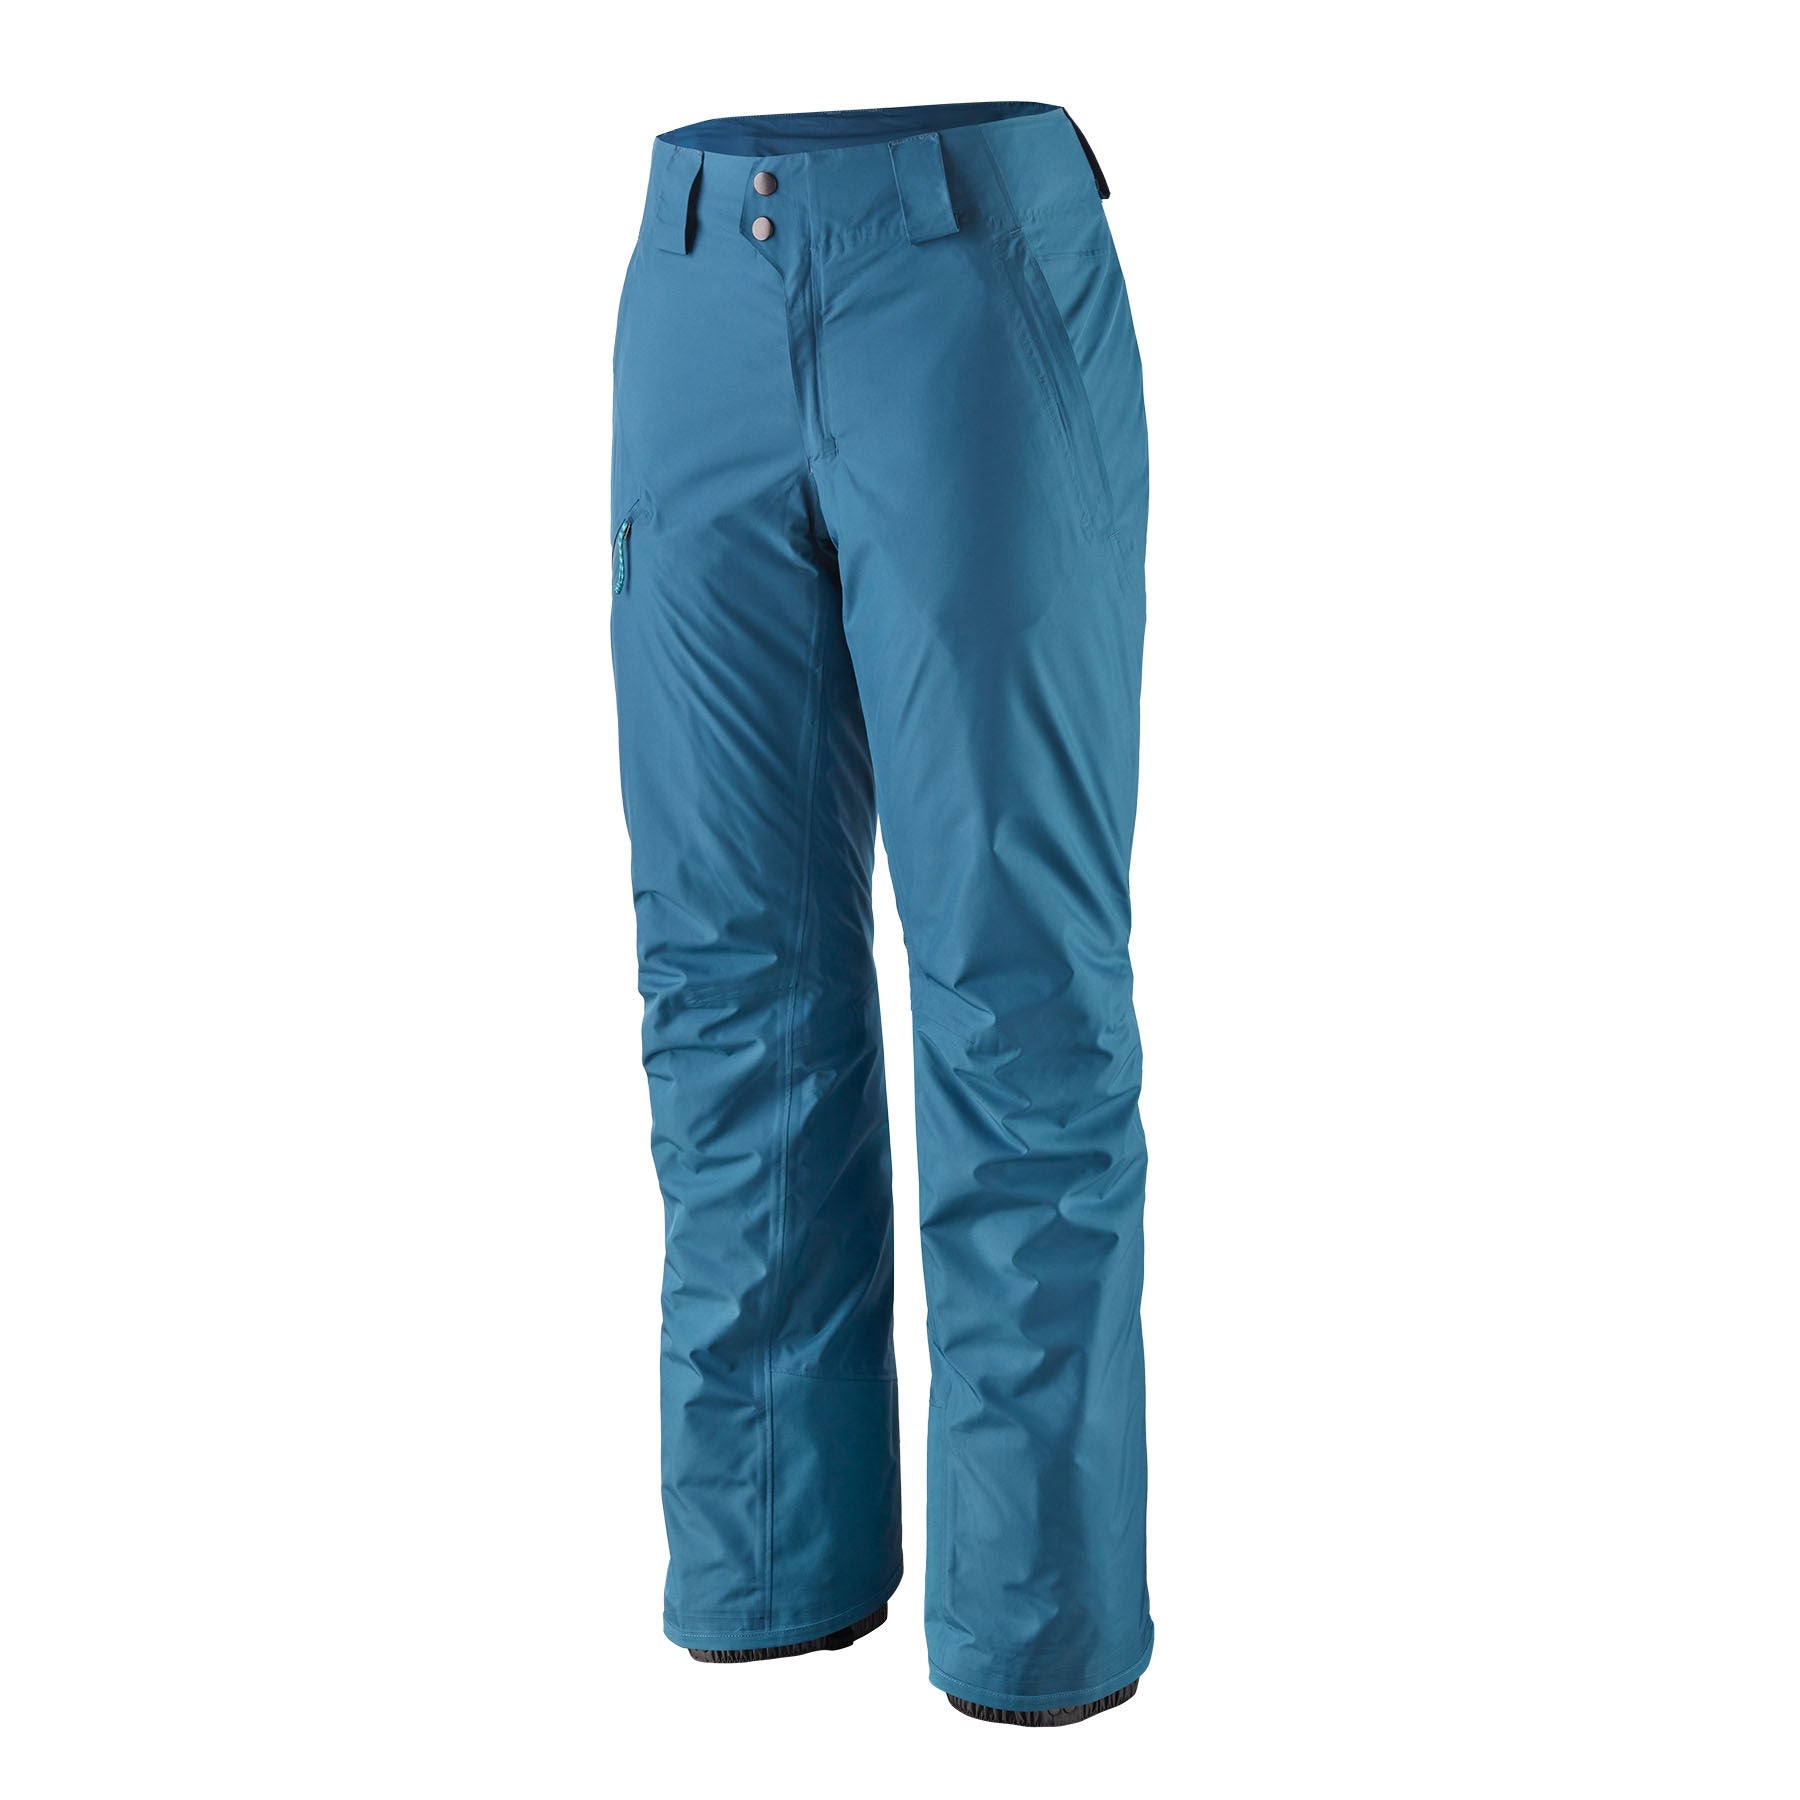 Insulated Powder Town Pants - Womens Short